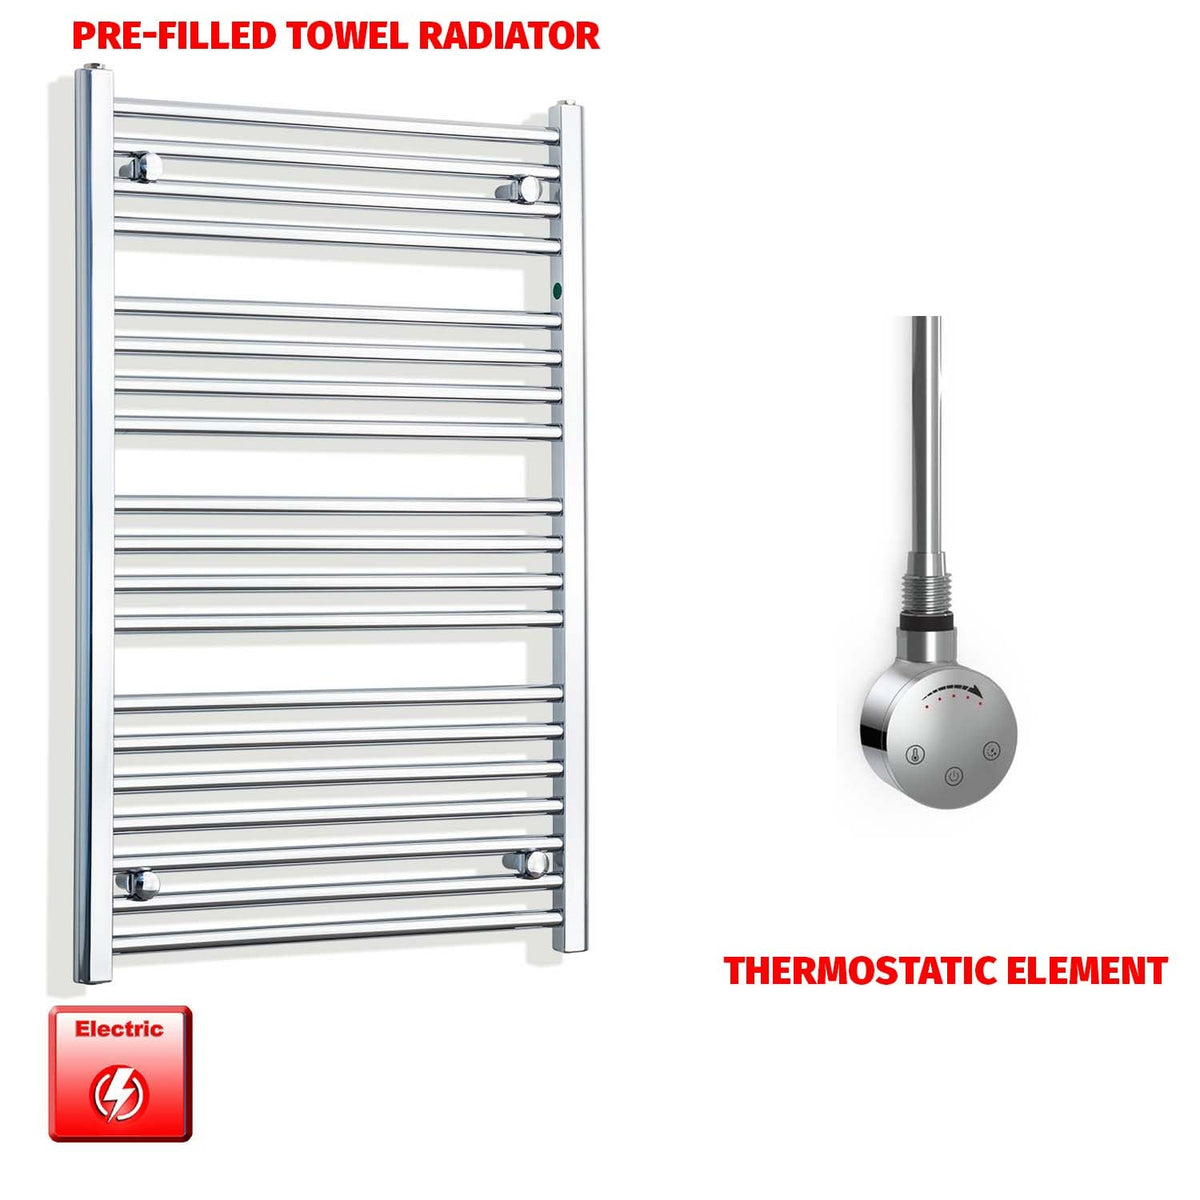 1000mm High 550mm Wide Pre-Filled Electric Heated Towel Radiator Chrome HTR SMR Thermostatic element no timer